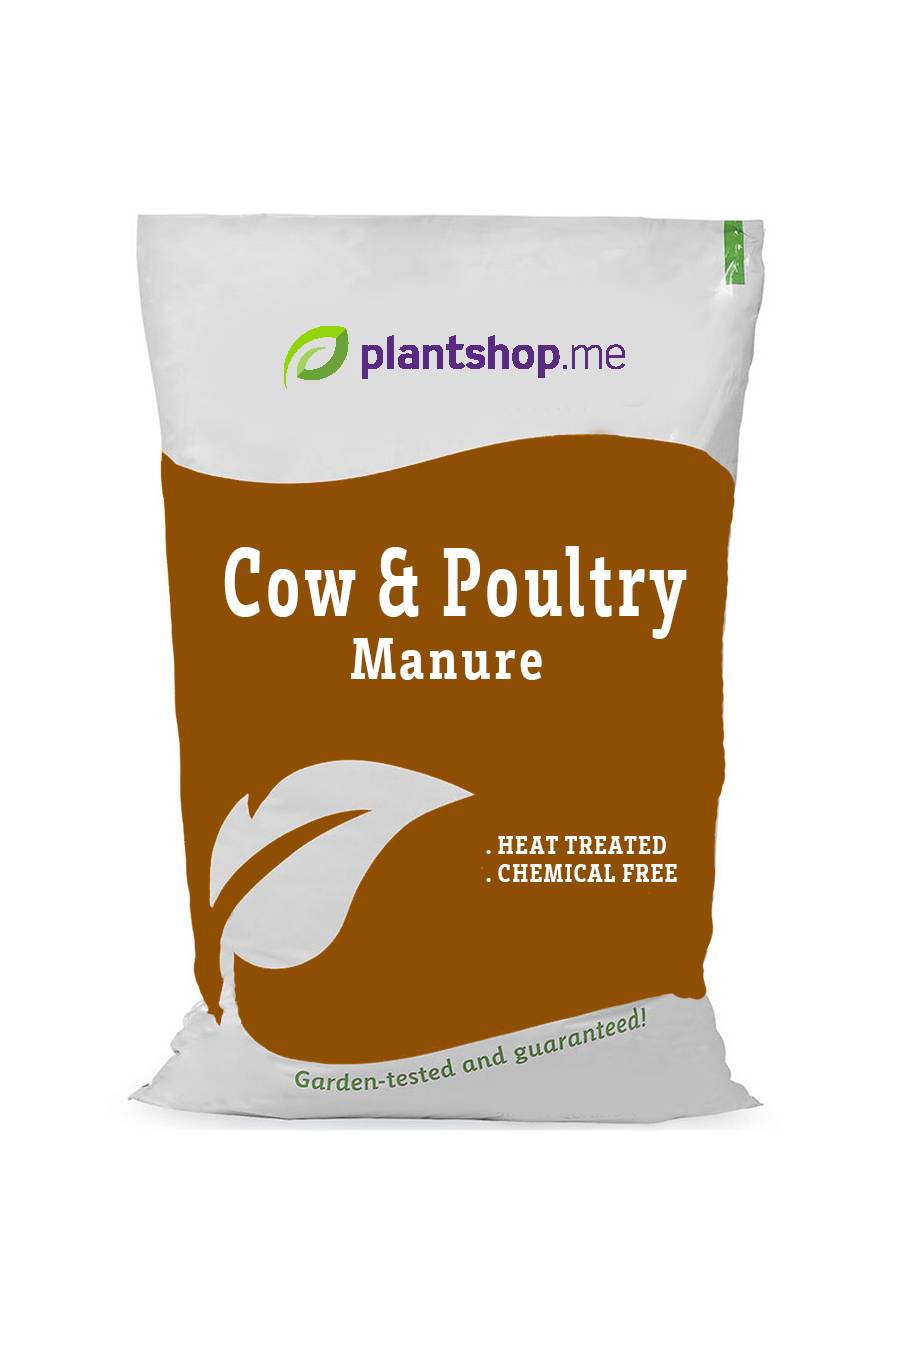 Cow & Poultry Manure